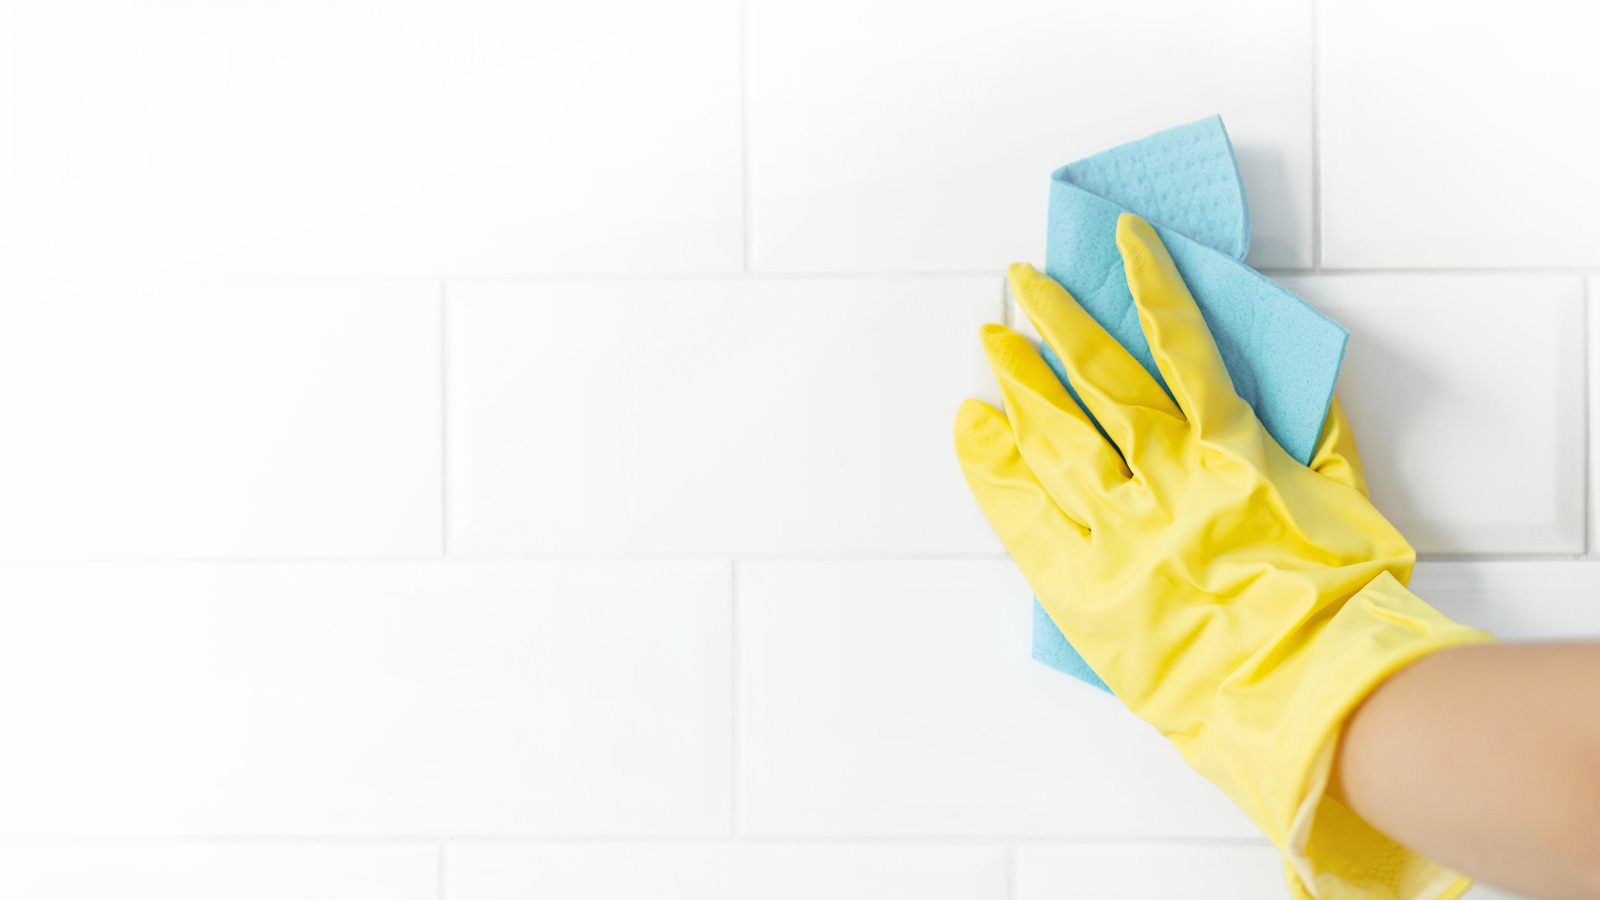 https://www.housedigest.com/img/gallery/the-tiktok-grout-cleaning-hack-the-internet-is-obsessed-with/l-intro-1635344987.jpg